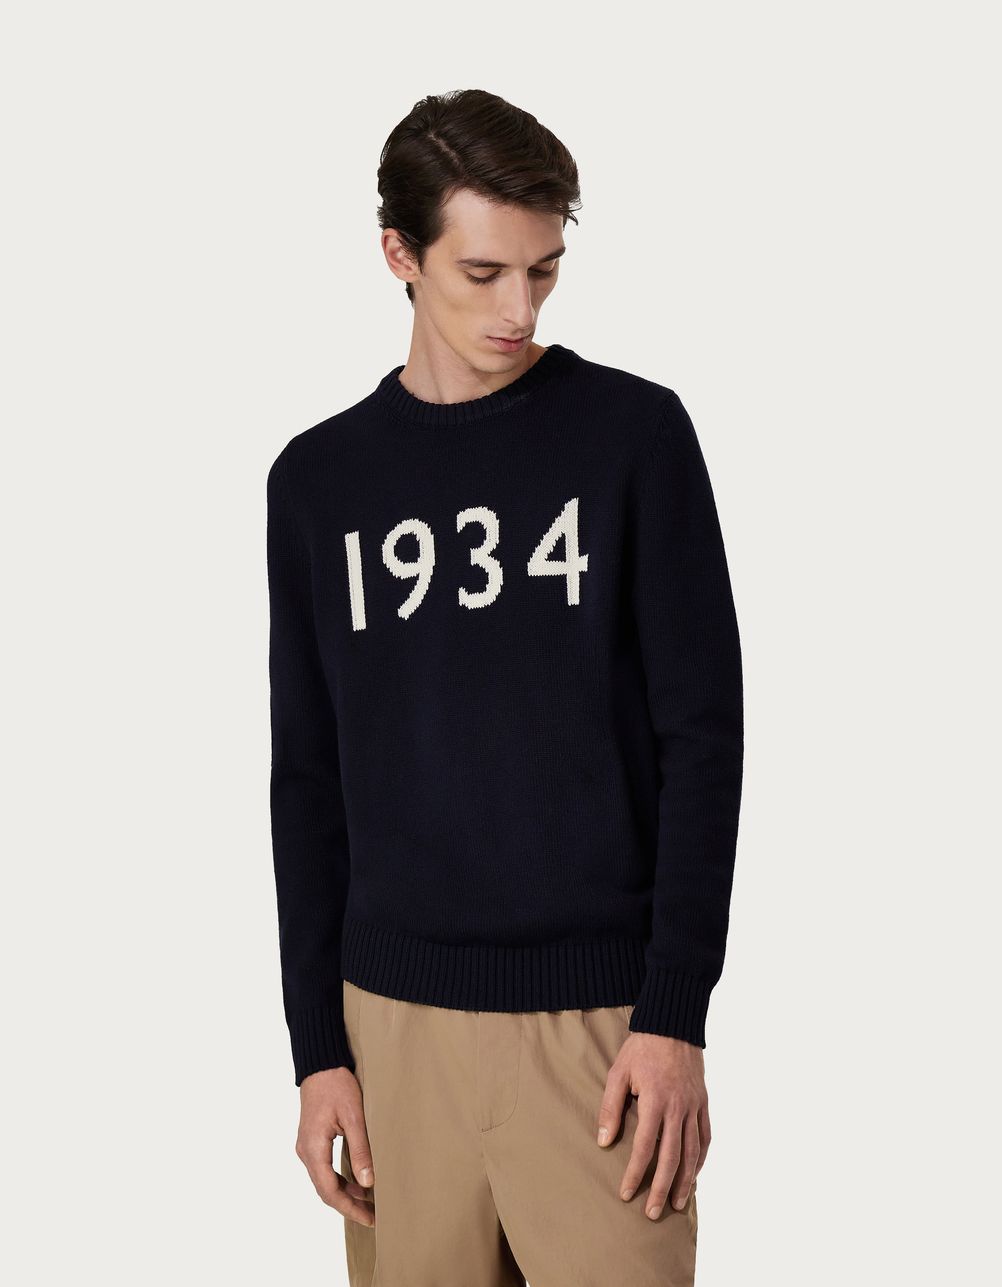 Navy blue and ivory crew-neck in cotton